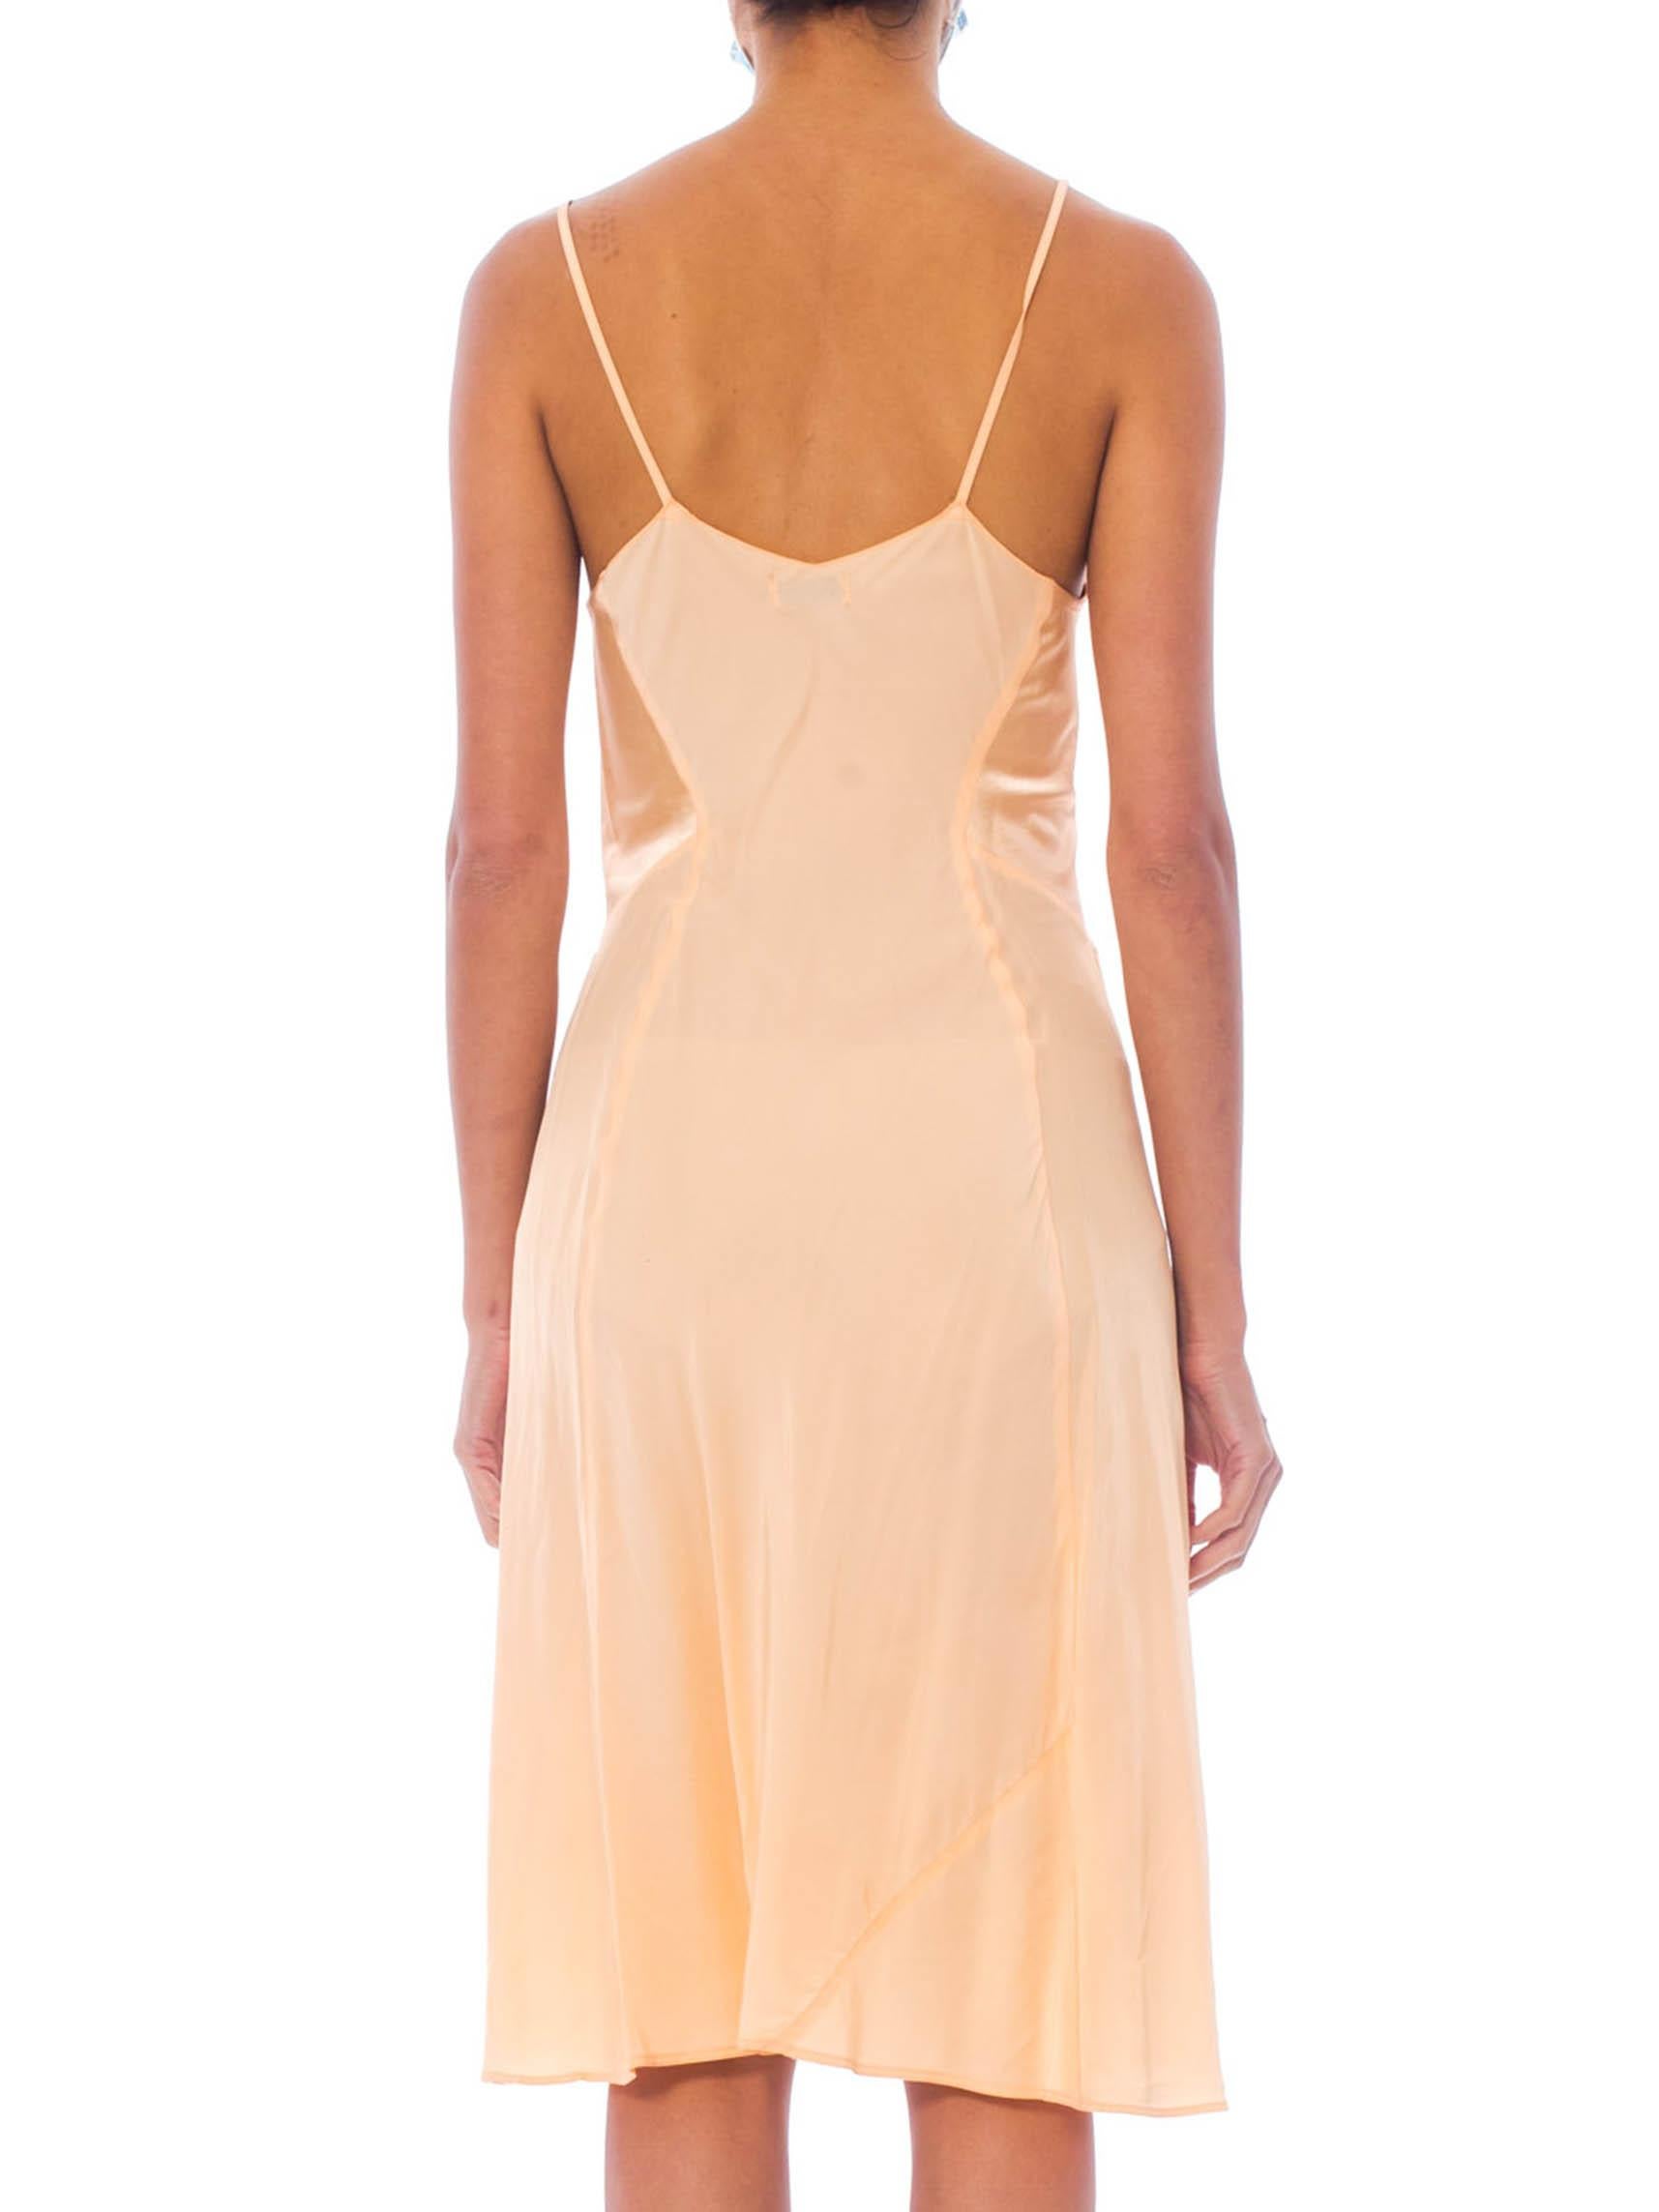 1940S Peach Bias Cut Rayon Slip Dress With Elastic Side Panels For Fit In Excellent Condition In New York, NY